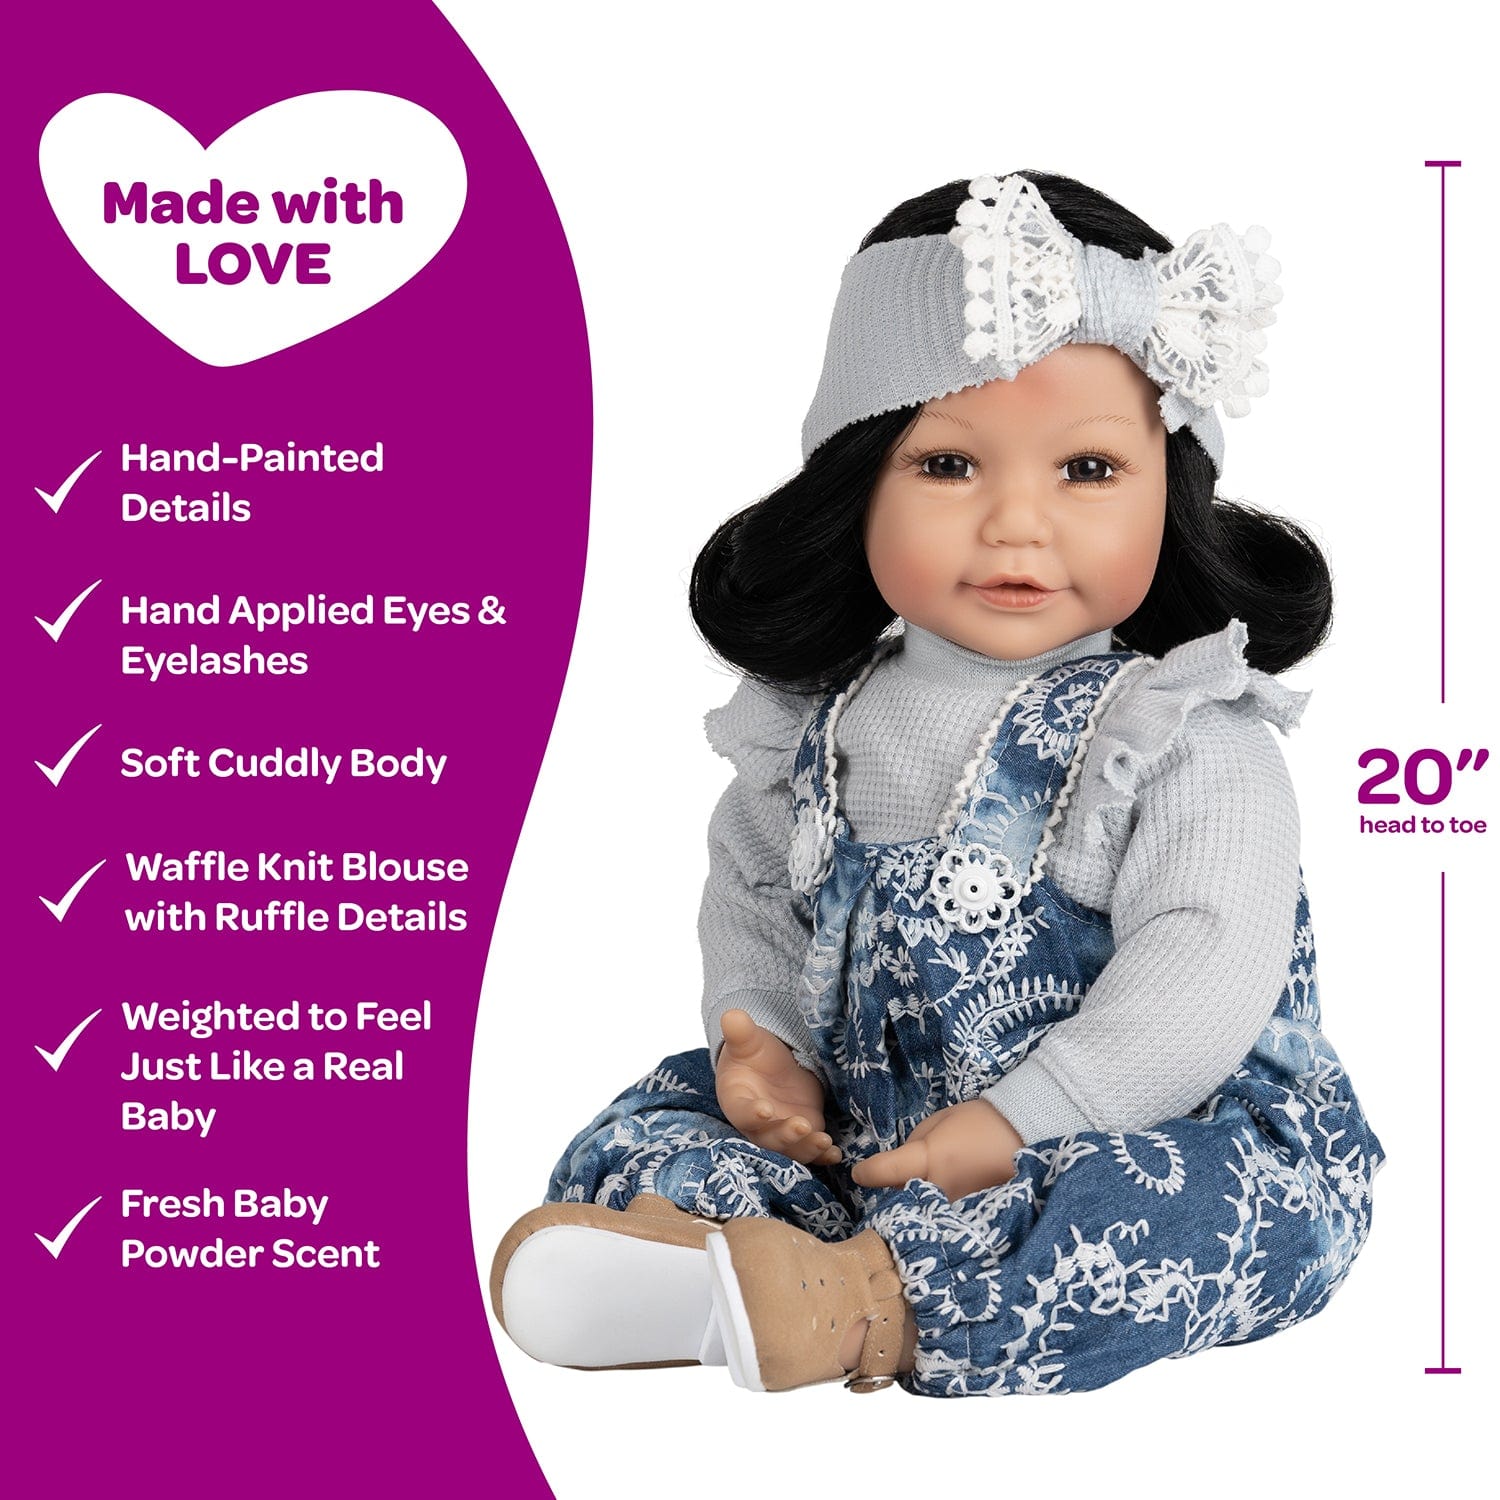 Adora Toddlertime Vintage Lace Baby Doll, Doll Clothes & Accessories Set